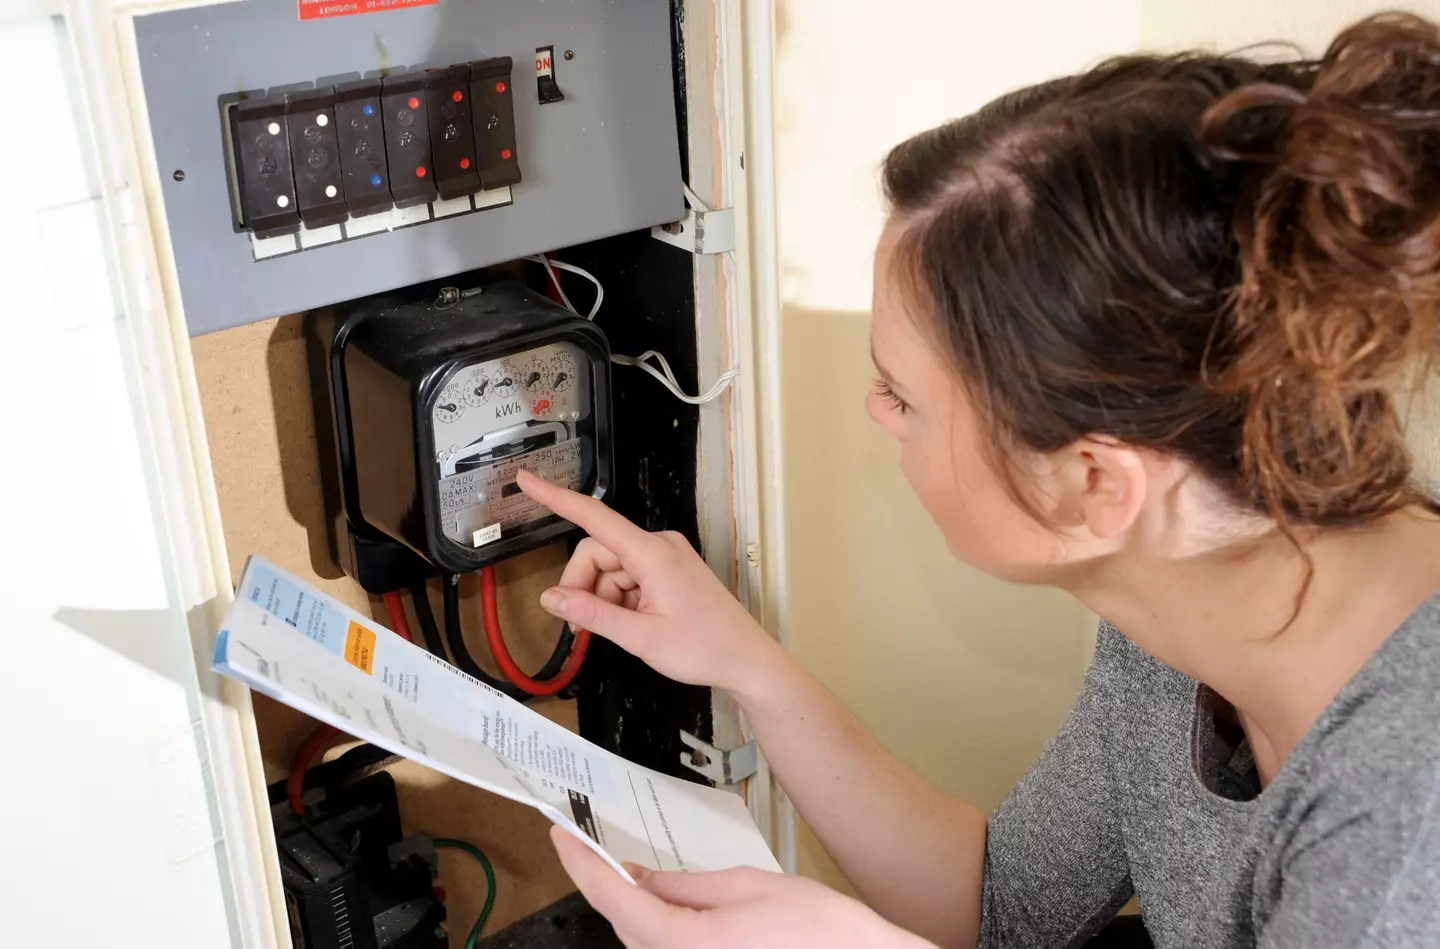 Brits are reporting problems in submitting their meter readings online (